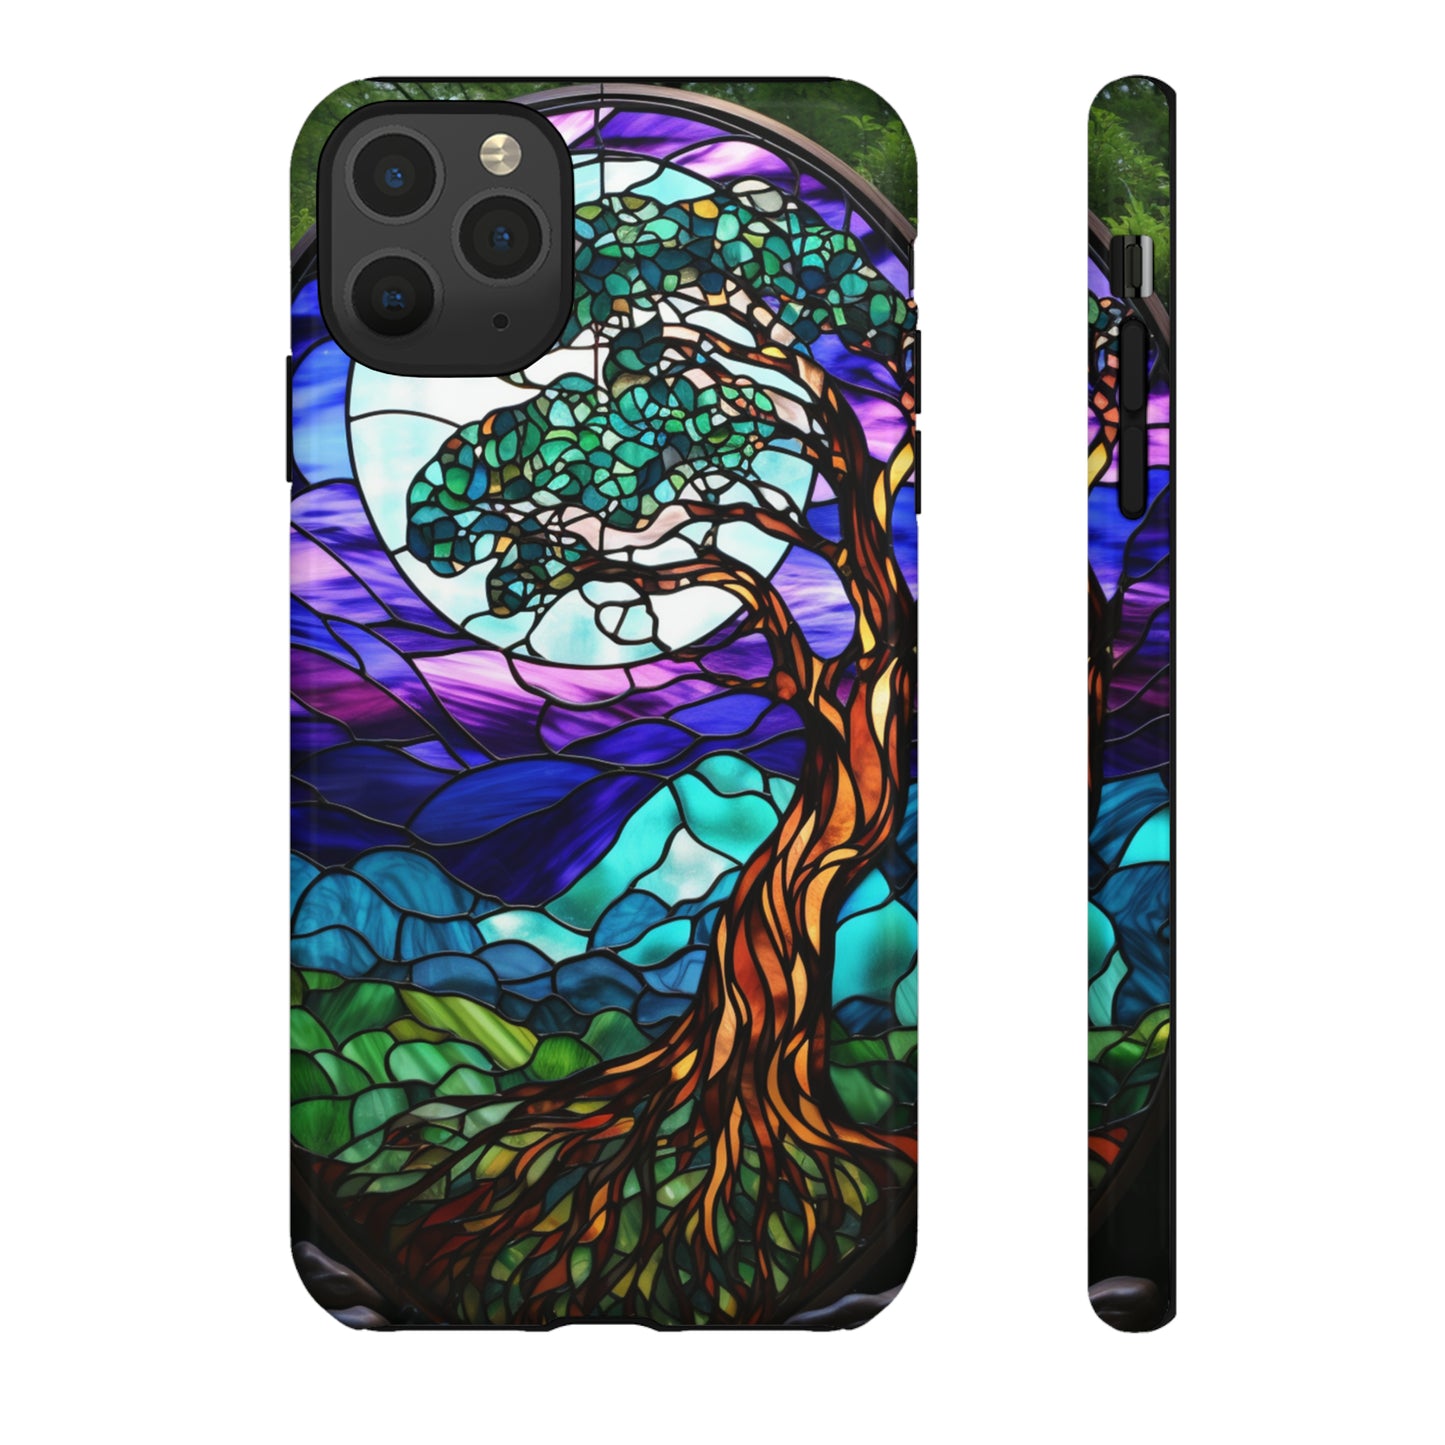 Stained Glass Mosaic Tile Tree in Moonlight